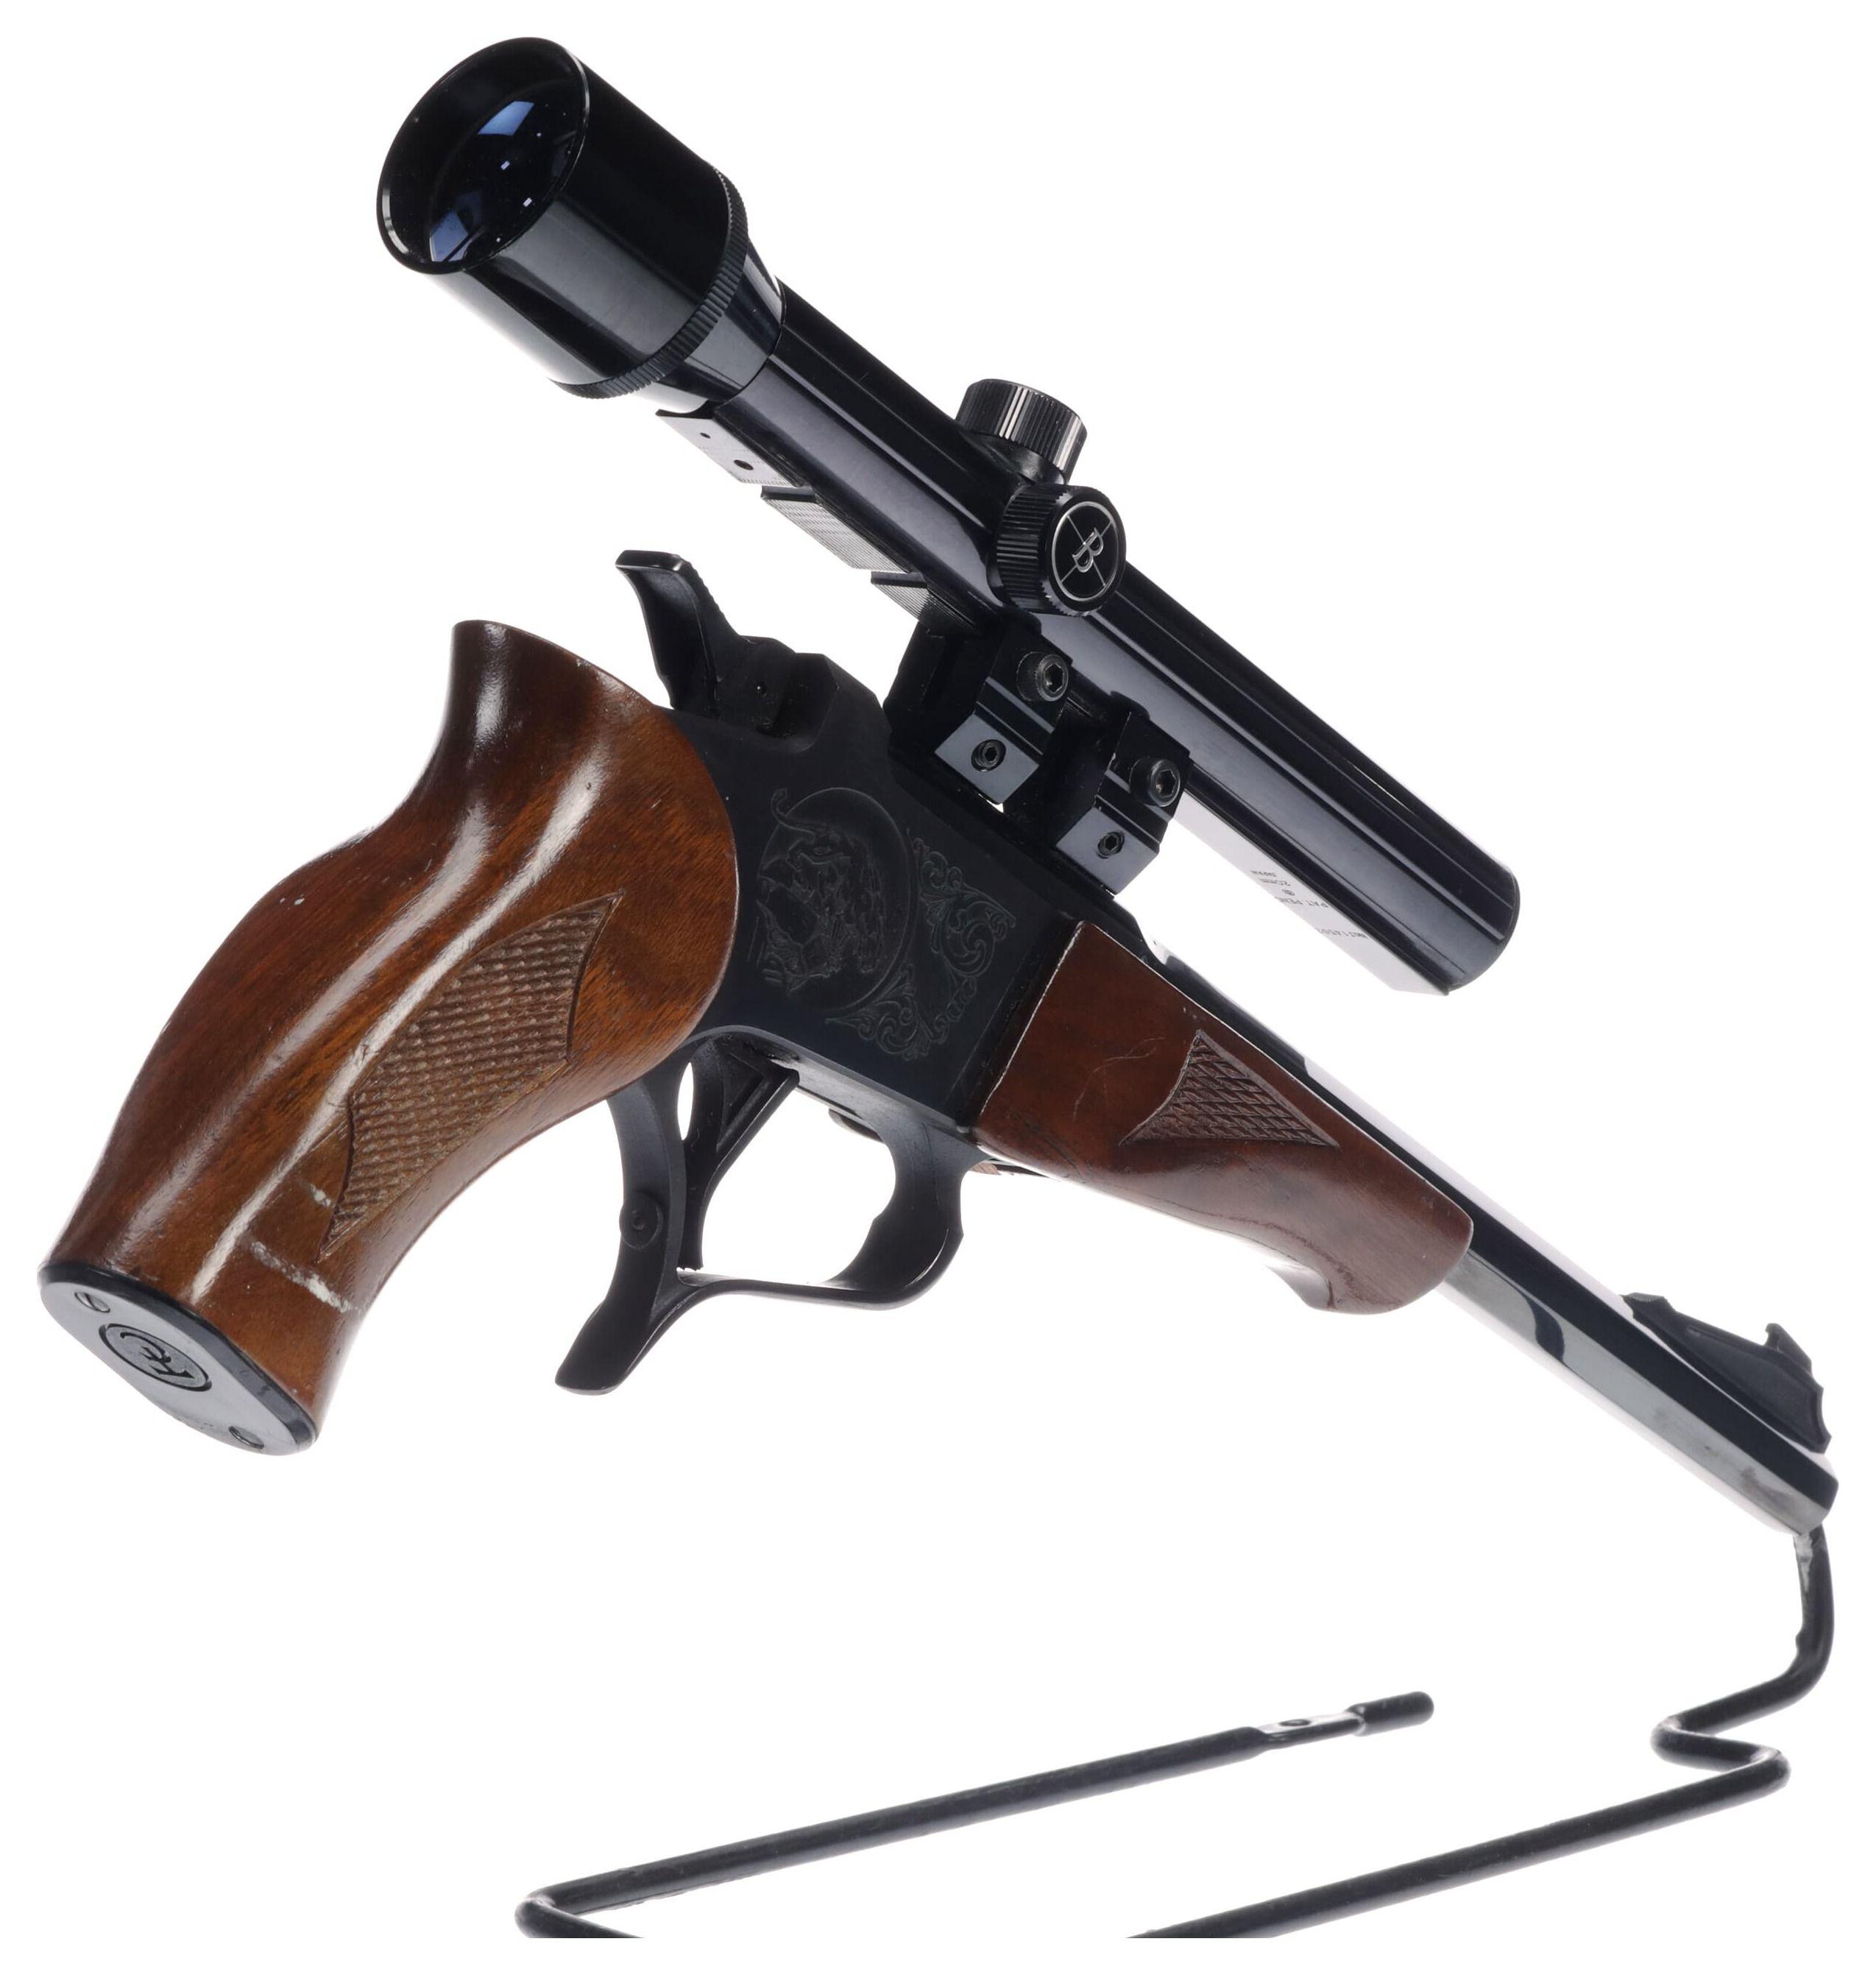 Thompson Center Arms Contender Single Shot Pistol with Scope